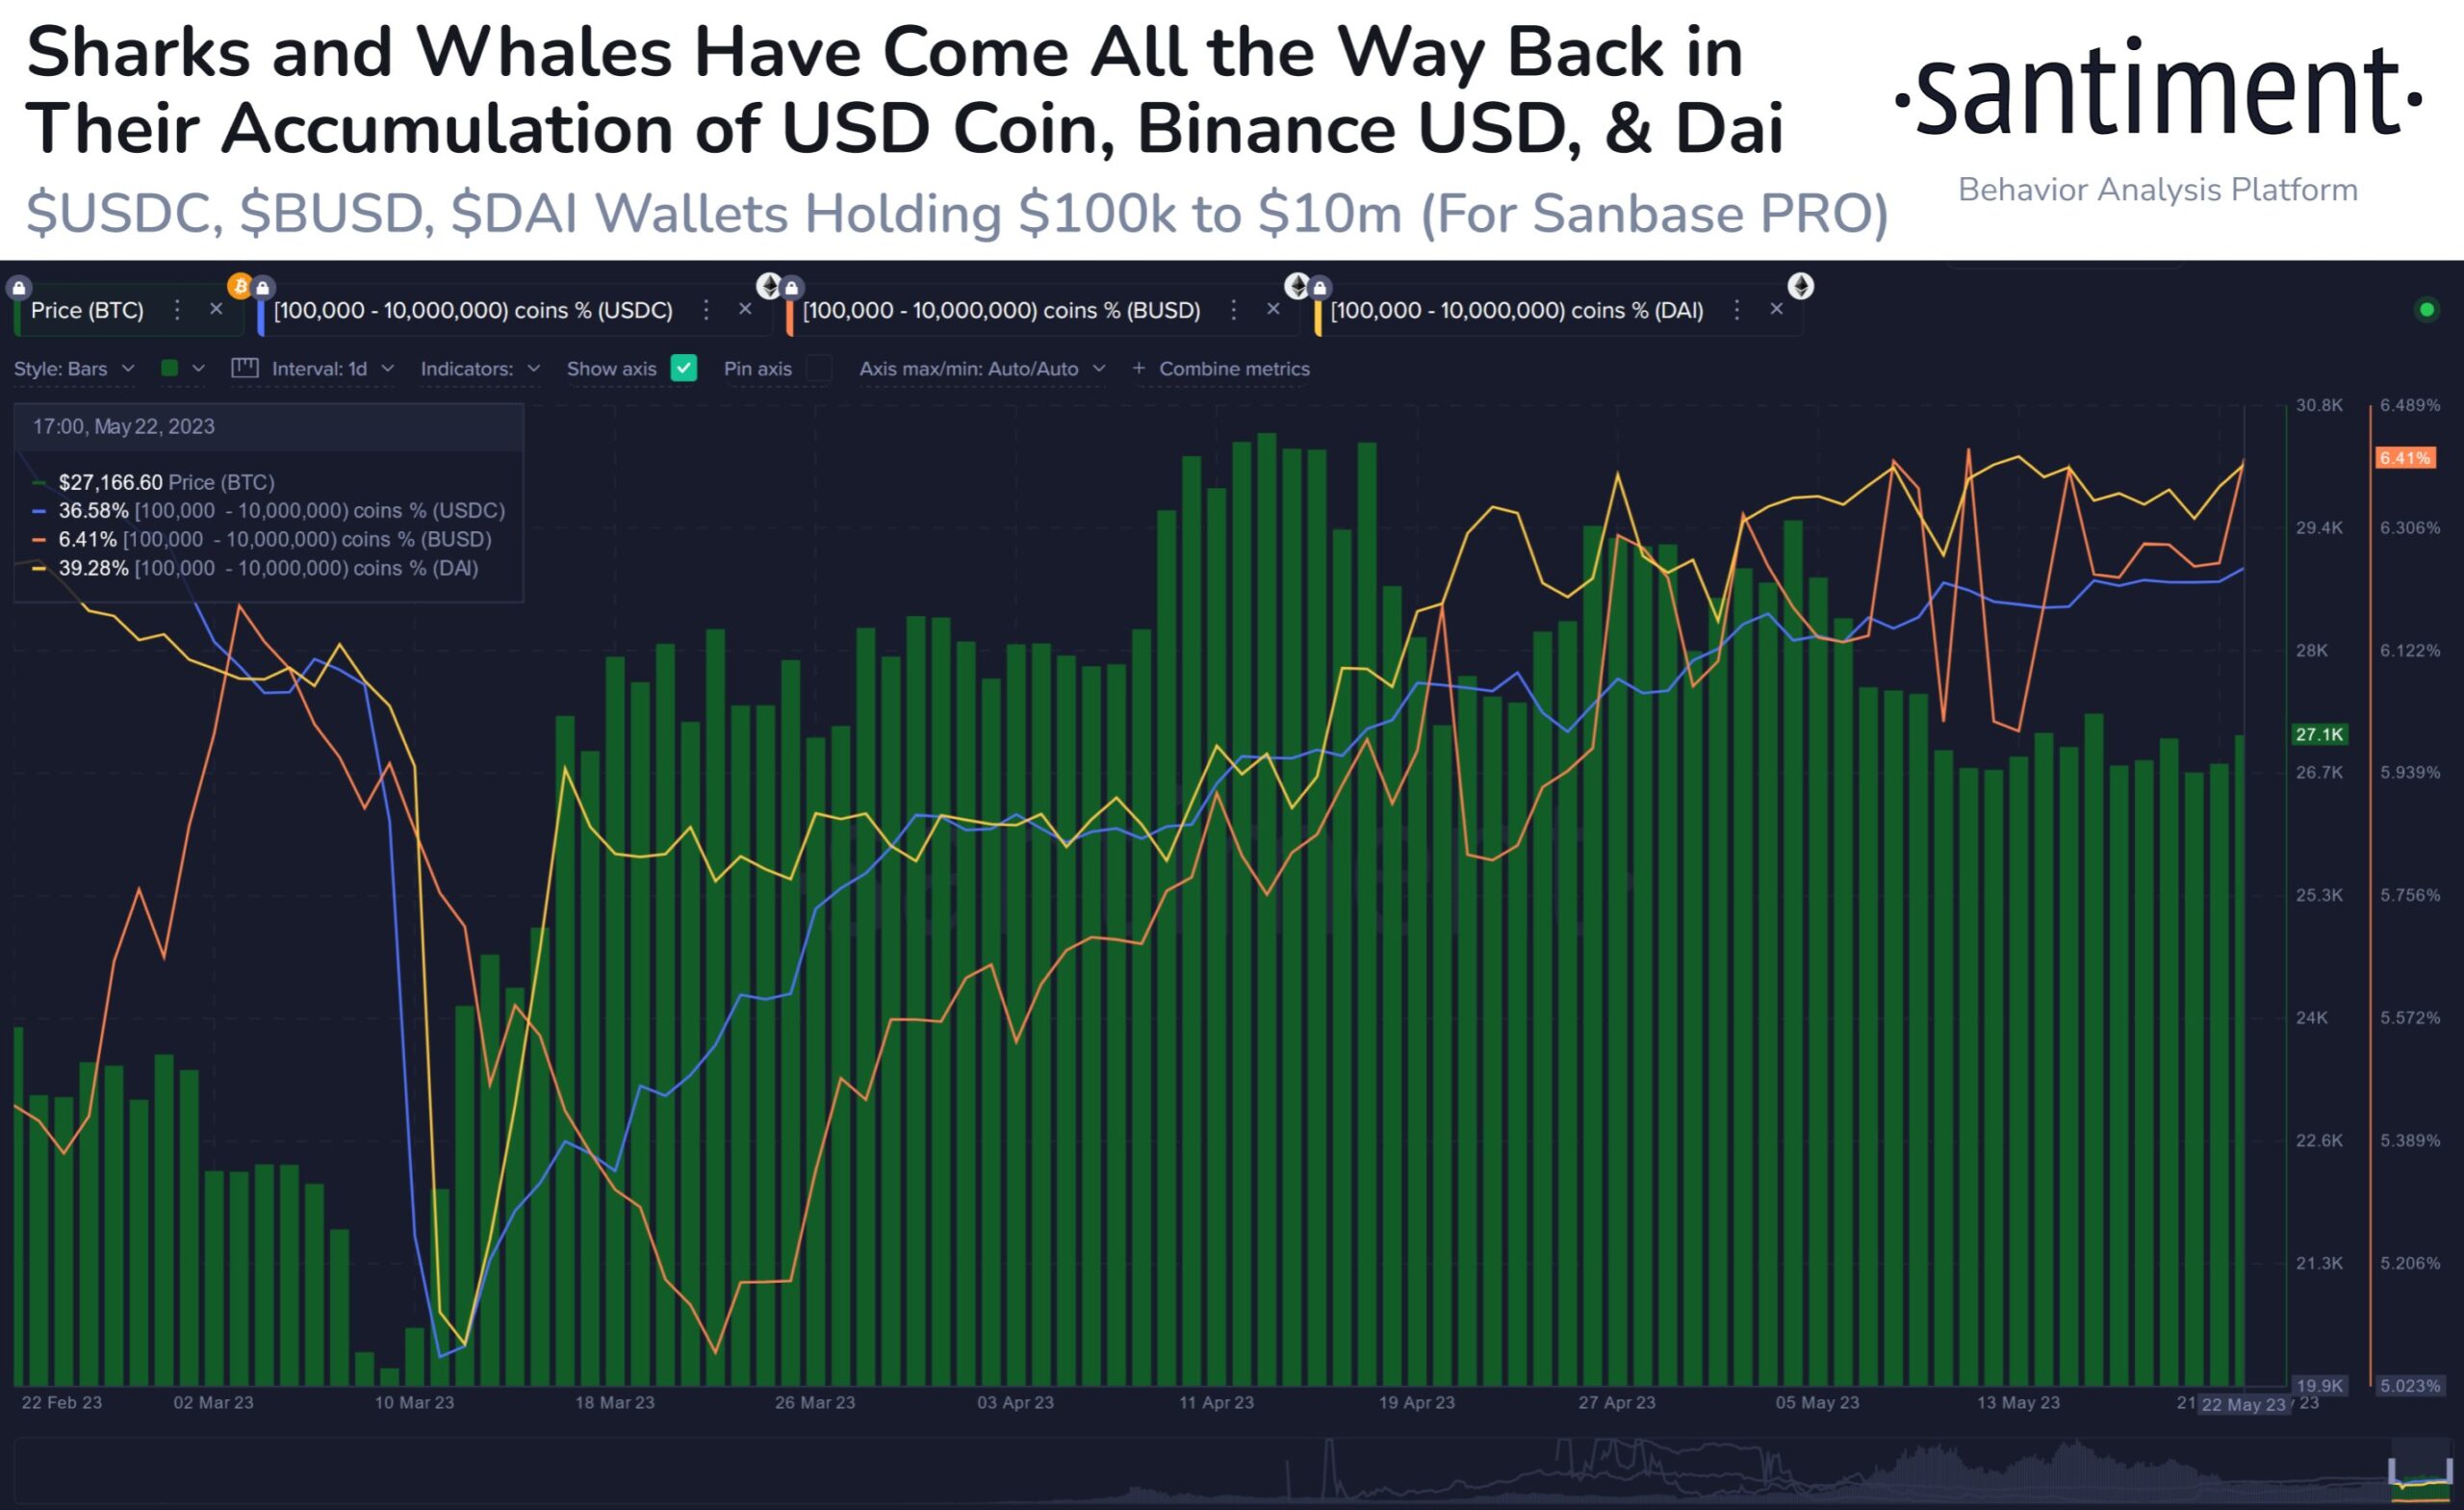 Whales coming back into stablecoins - Santiment